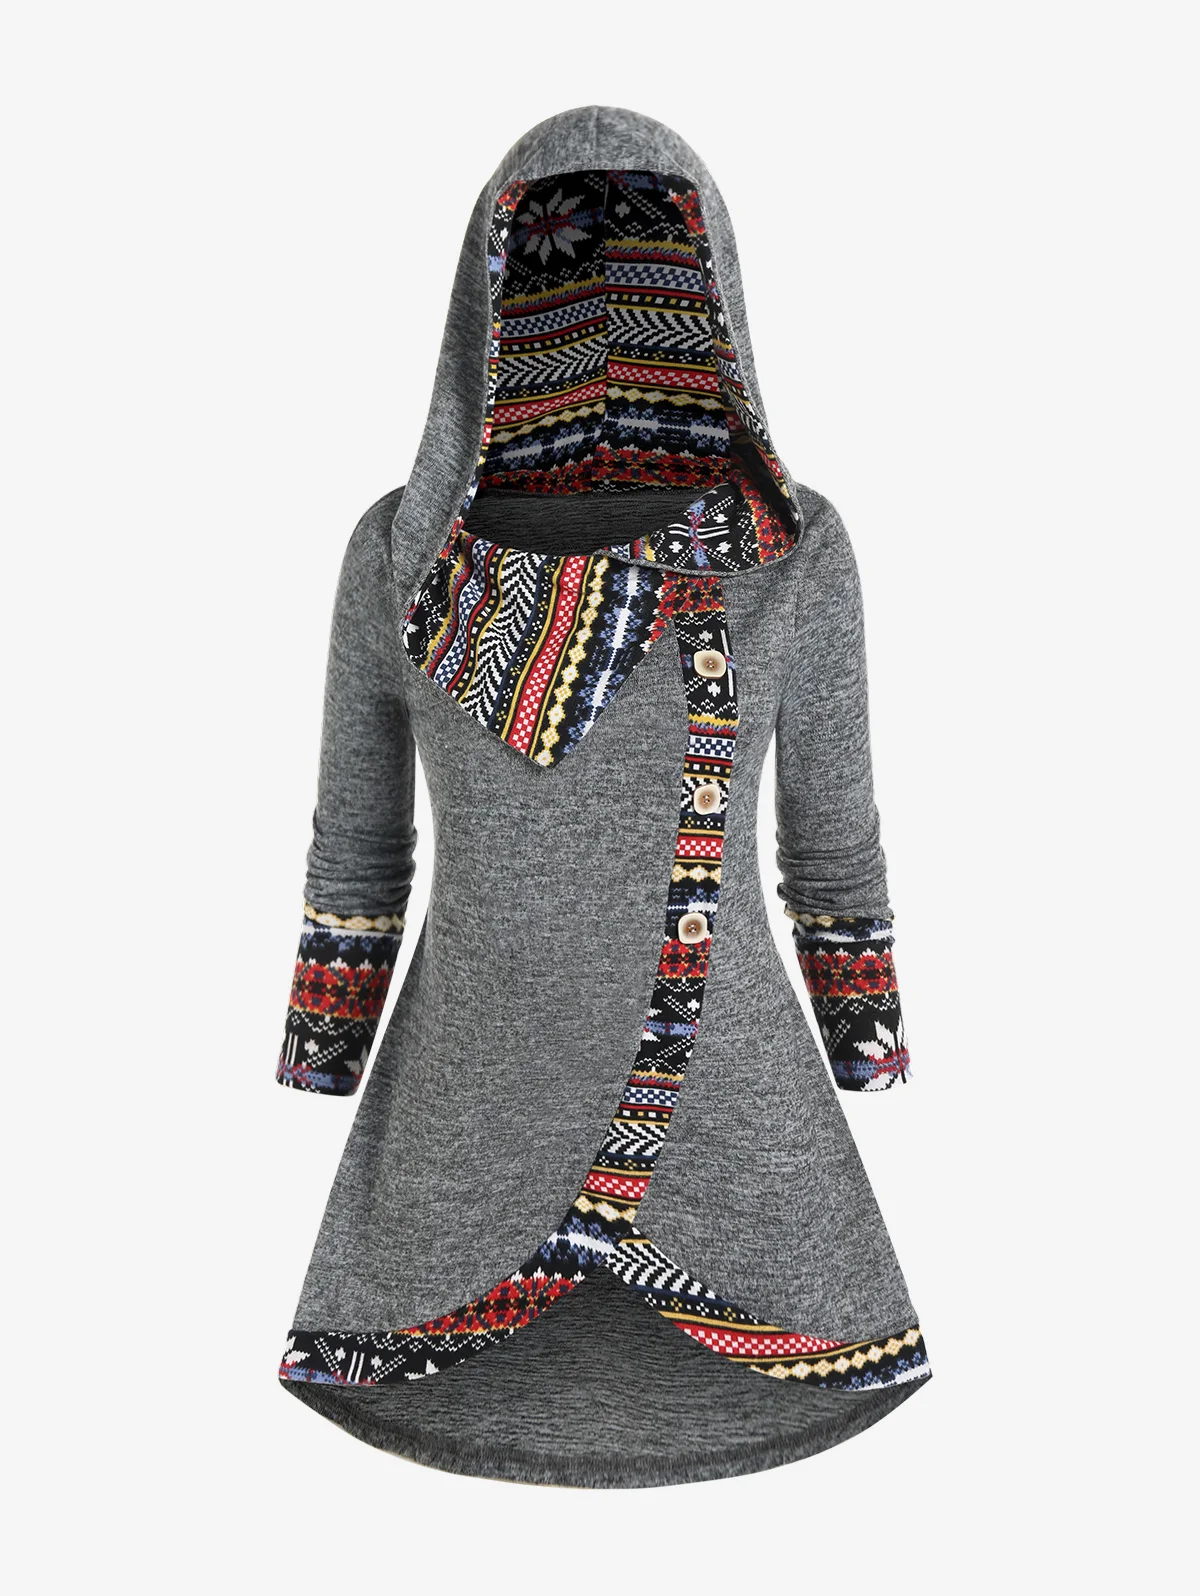 

ROSEGAL Ethnic Print Hooded Cinched Ruched Knitwear Plus Size Pullovers For Women Fall,Winter Tops Casual Longline Sweaters 4XL